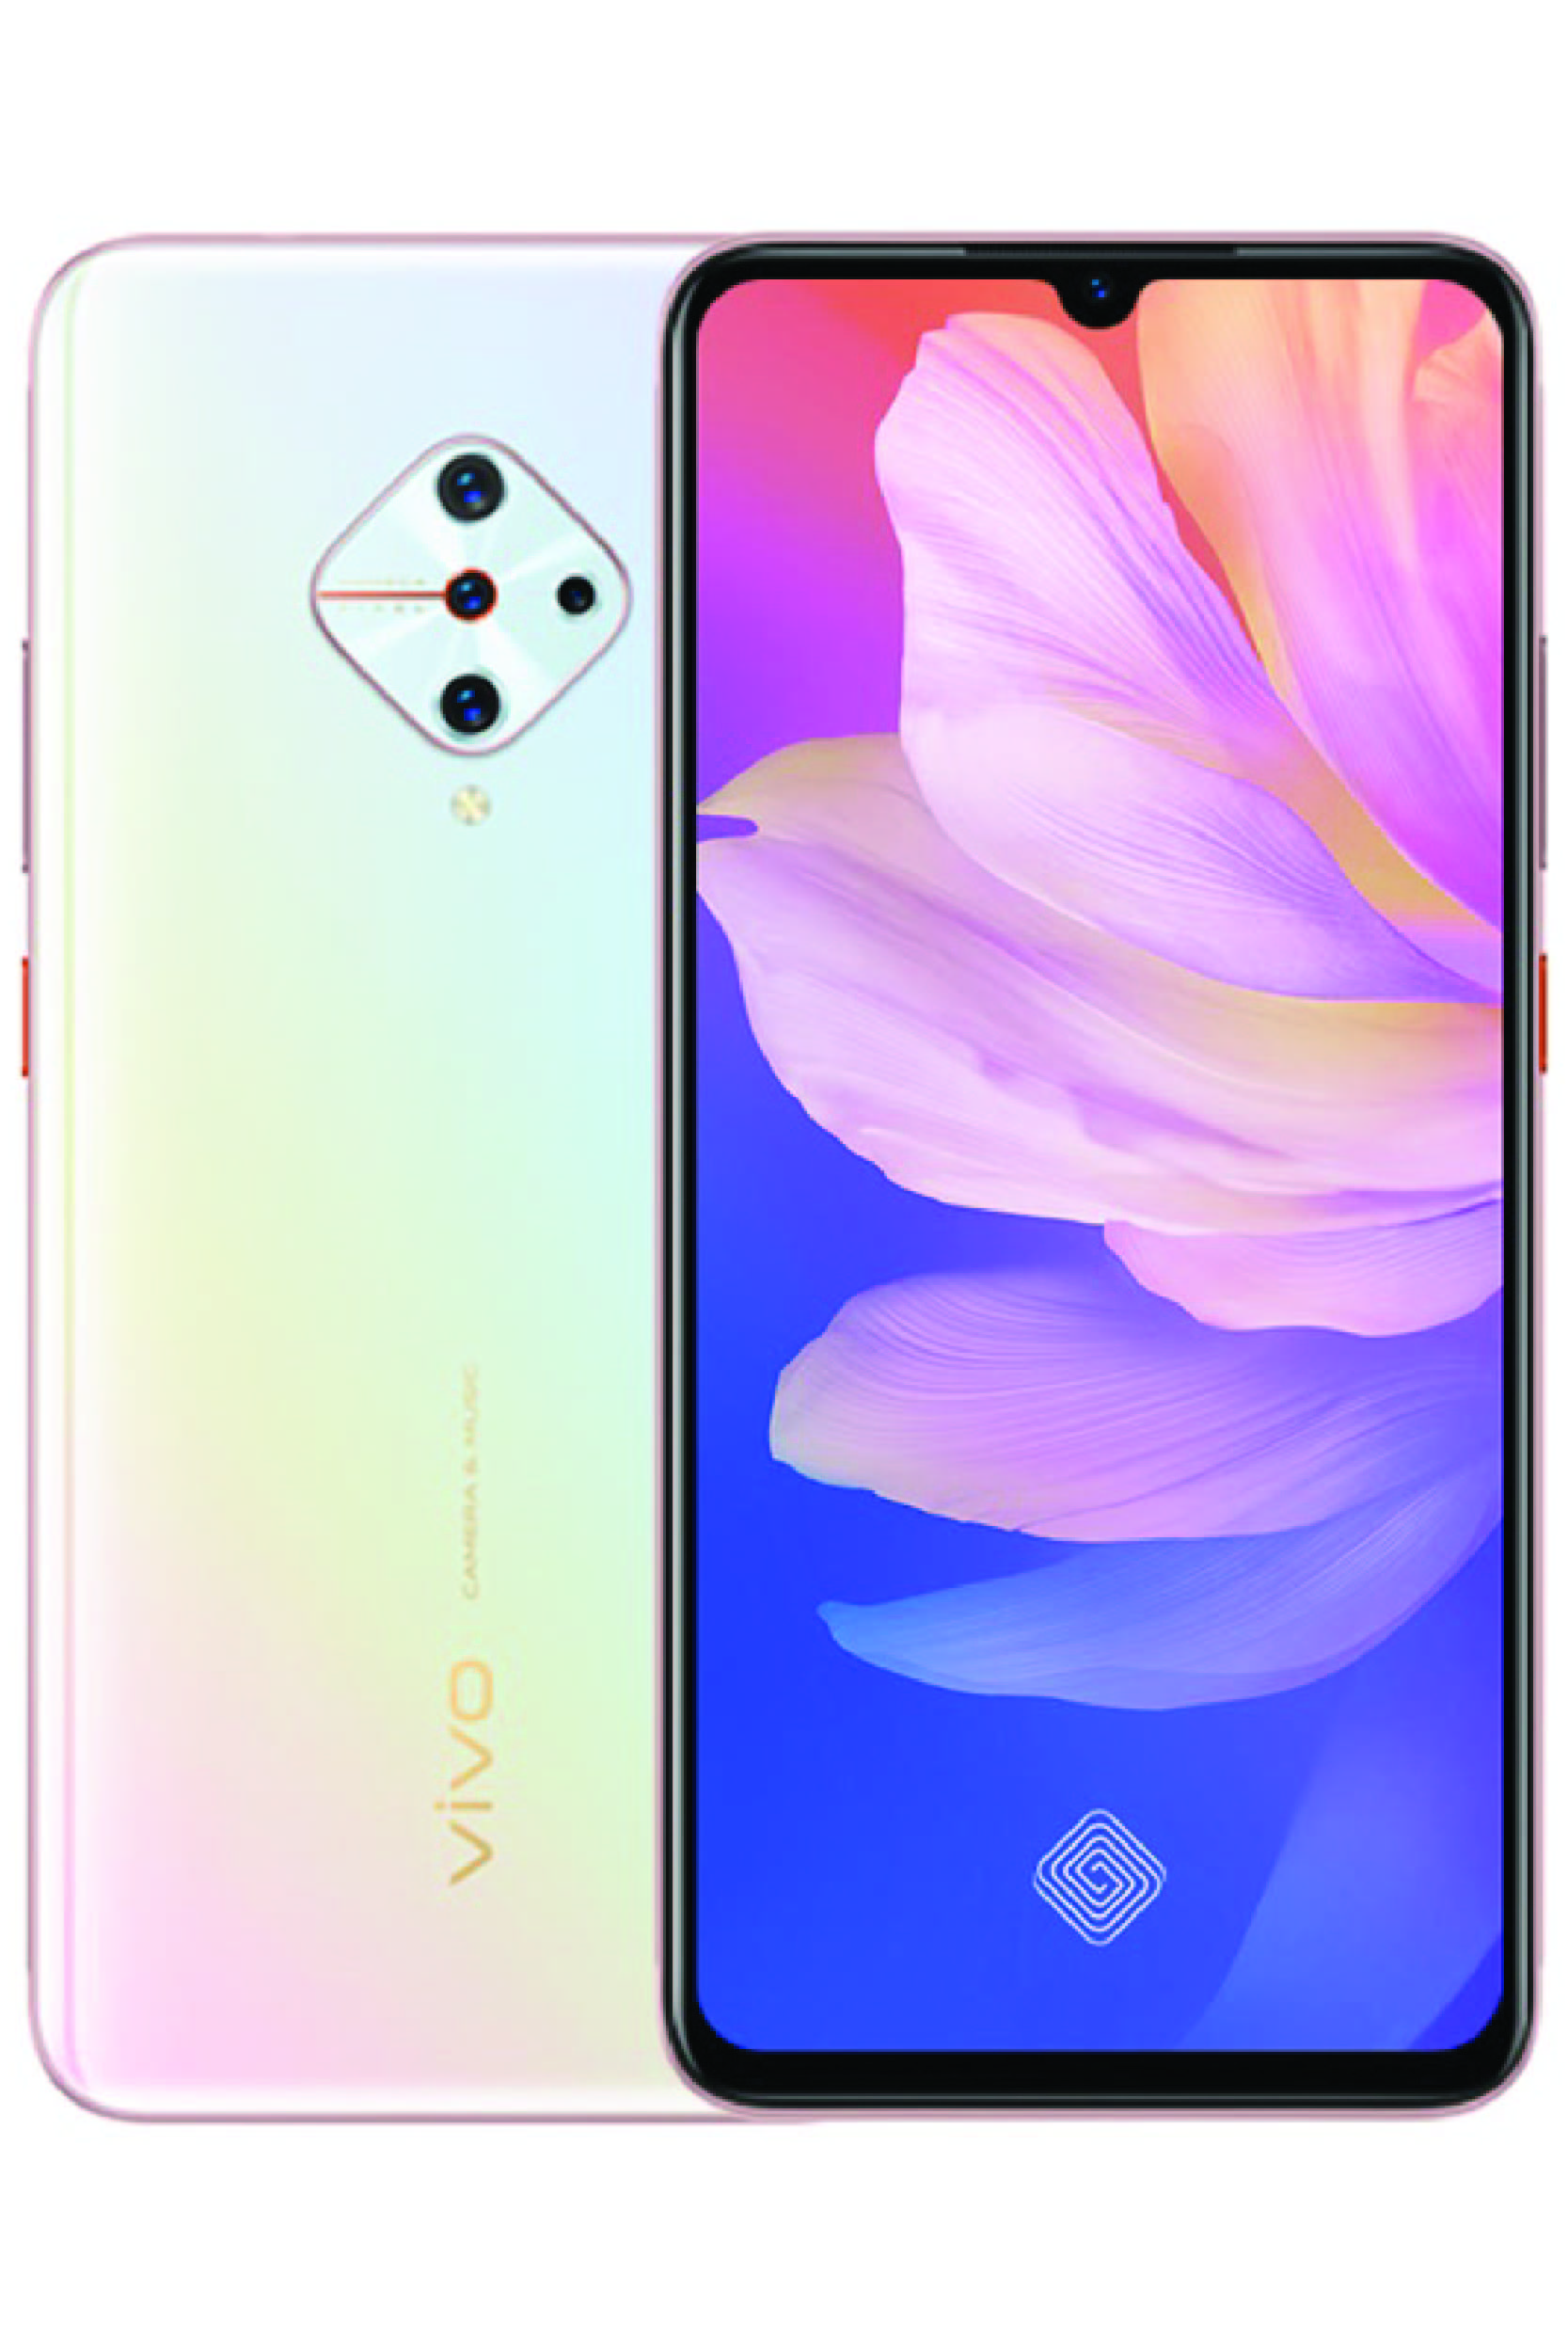 Vivo S1 Pro Price In Pakistan And Specs All You Should Know